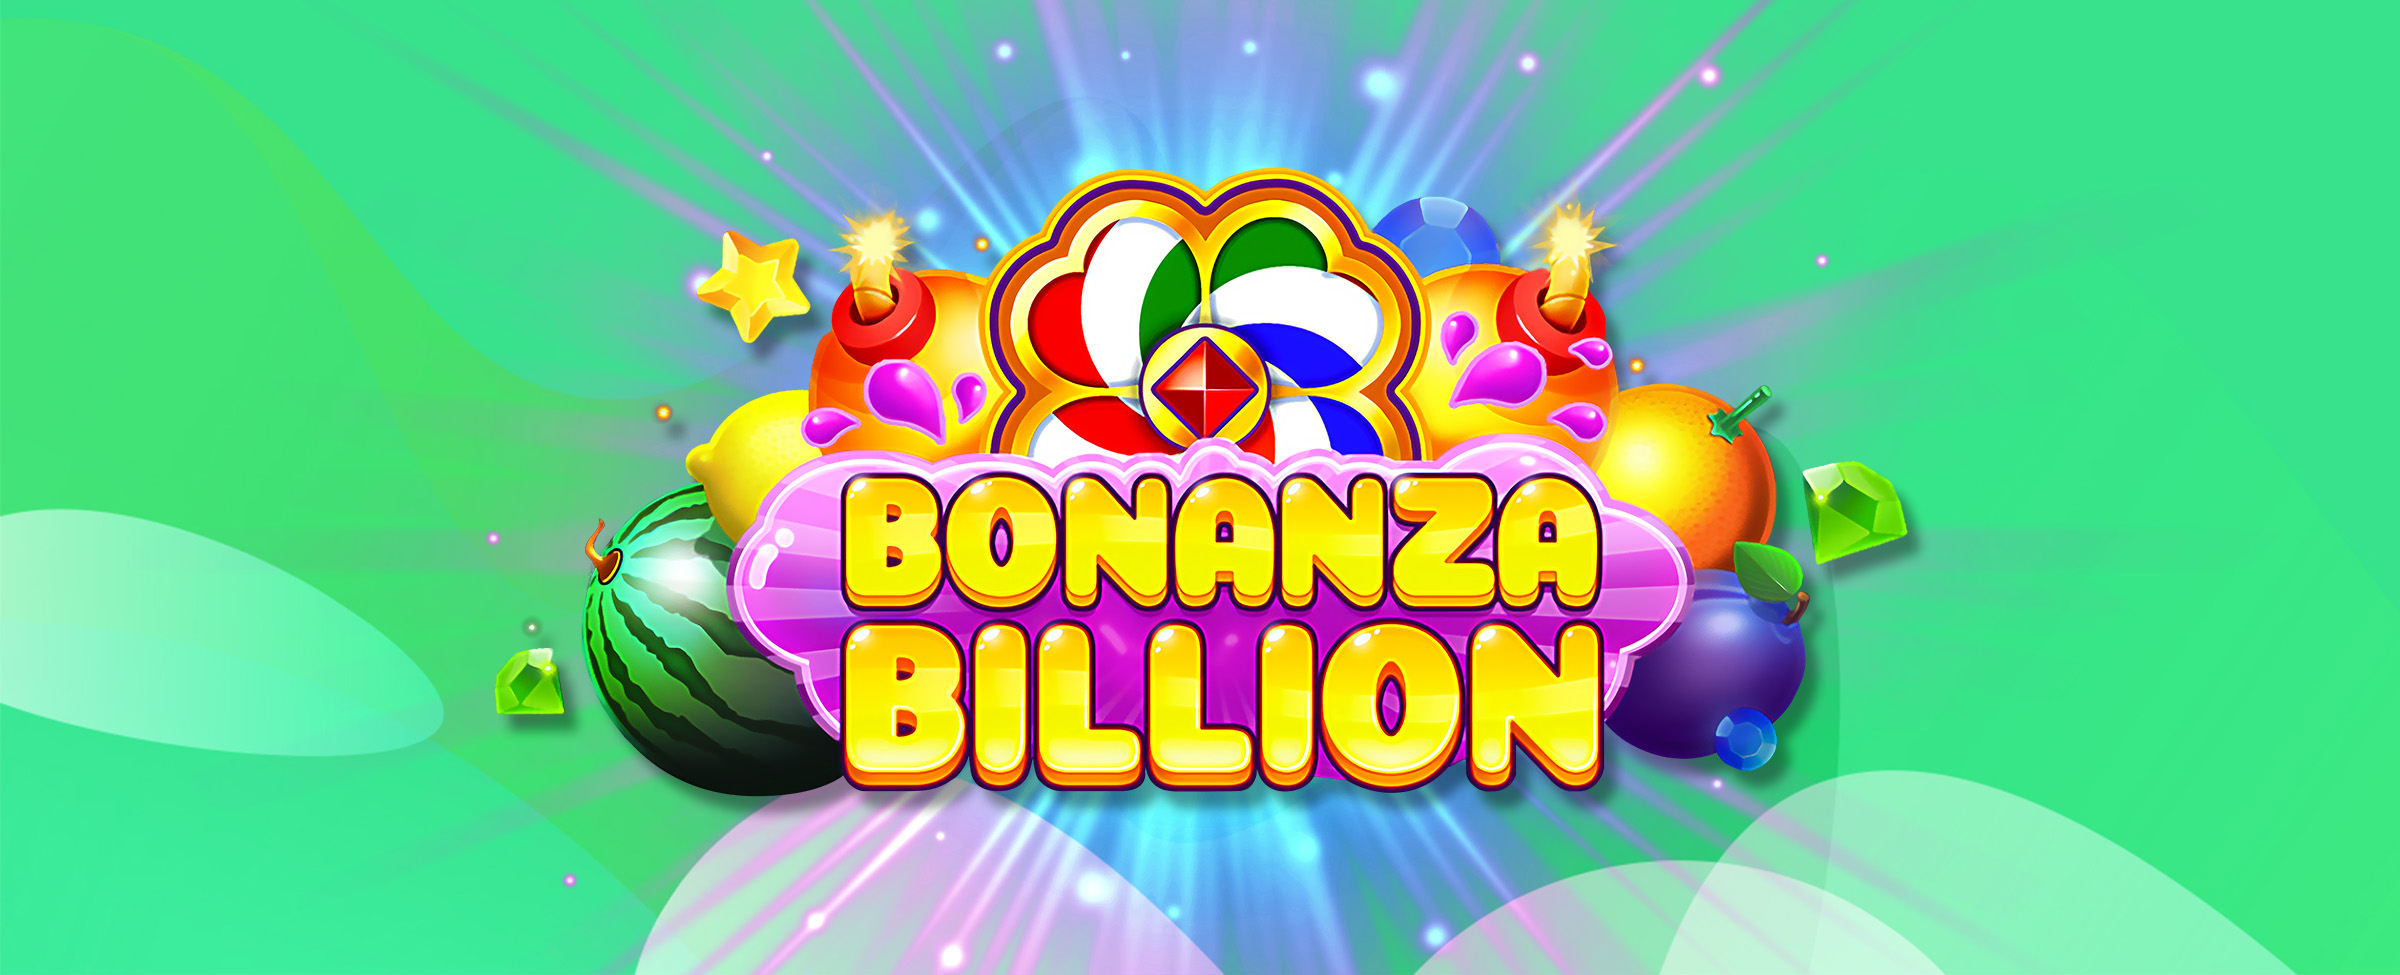 Exploding from the middle of the screen is the logo from the SlotsLV slots game, Bonanza Billion. Up front, we see a yellow bubbly logo that says Bonanza Billion, while in behind, various oversized 3D-animated fruits including a watermelon, plum, lemon, and orange. Behind, we see a green background.